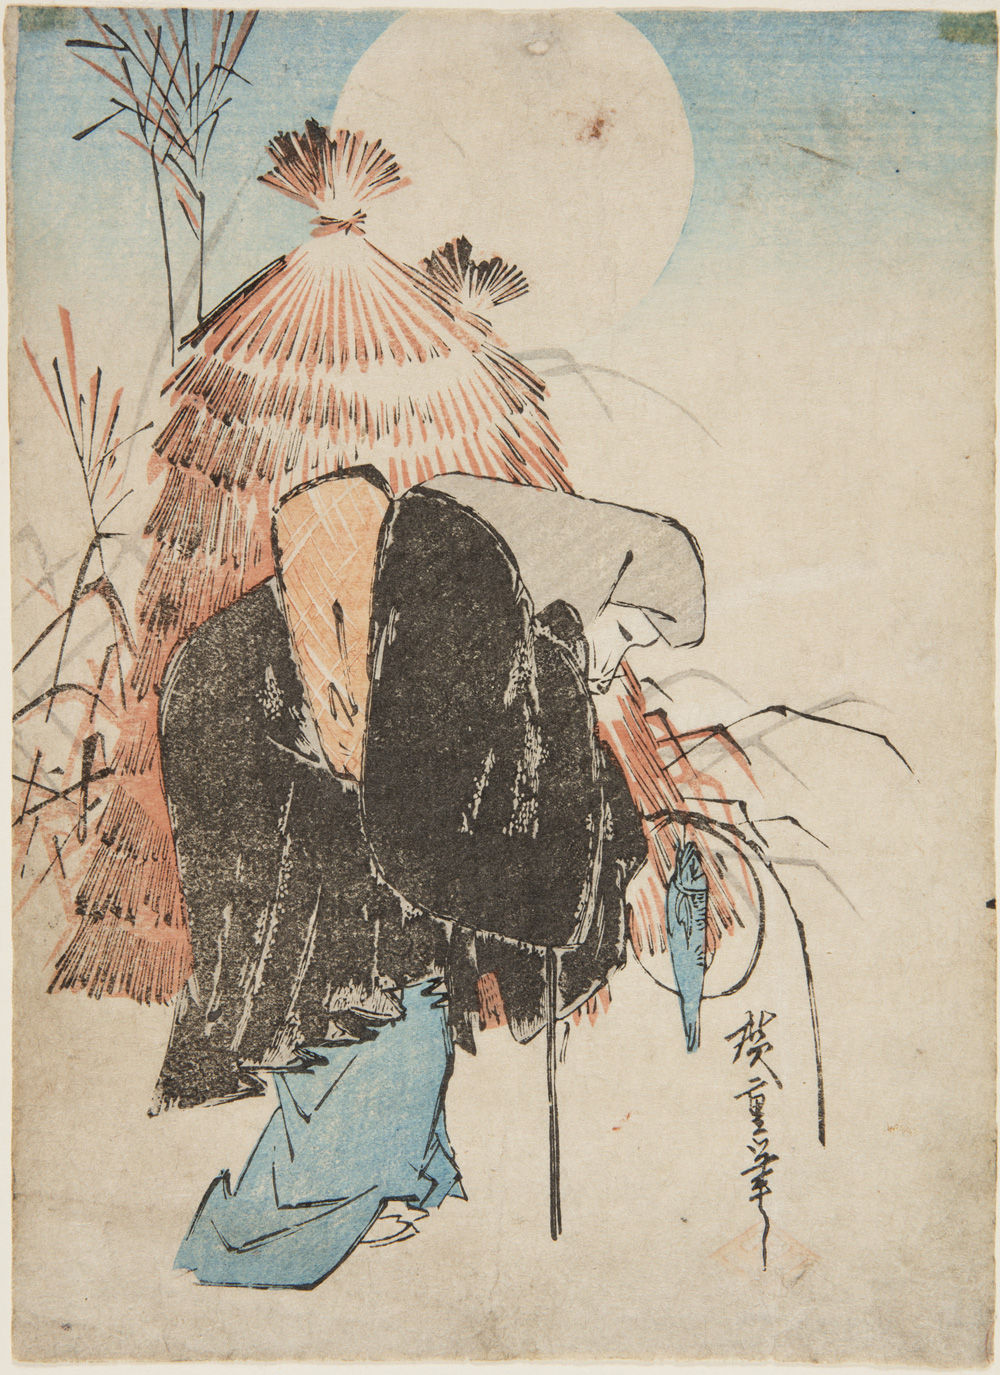 Japanese print of a bent figure dressed in traditional clothes, appears to have a fox face, holding line with a dangling fish, there are haystacks and a full moon in the background.